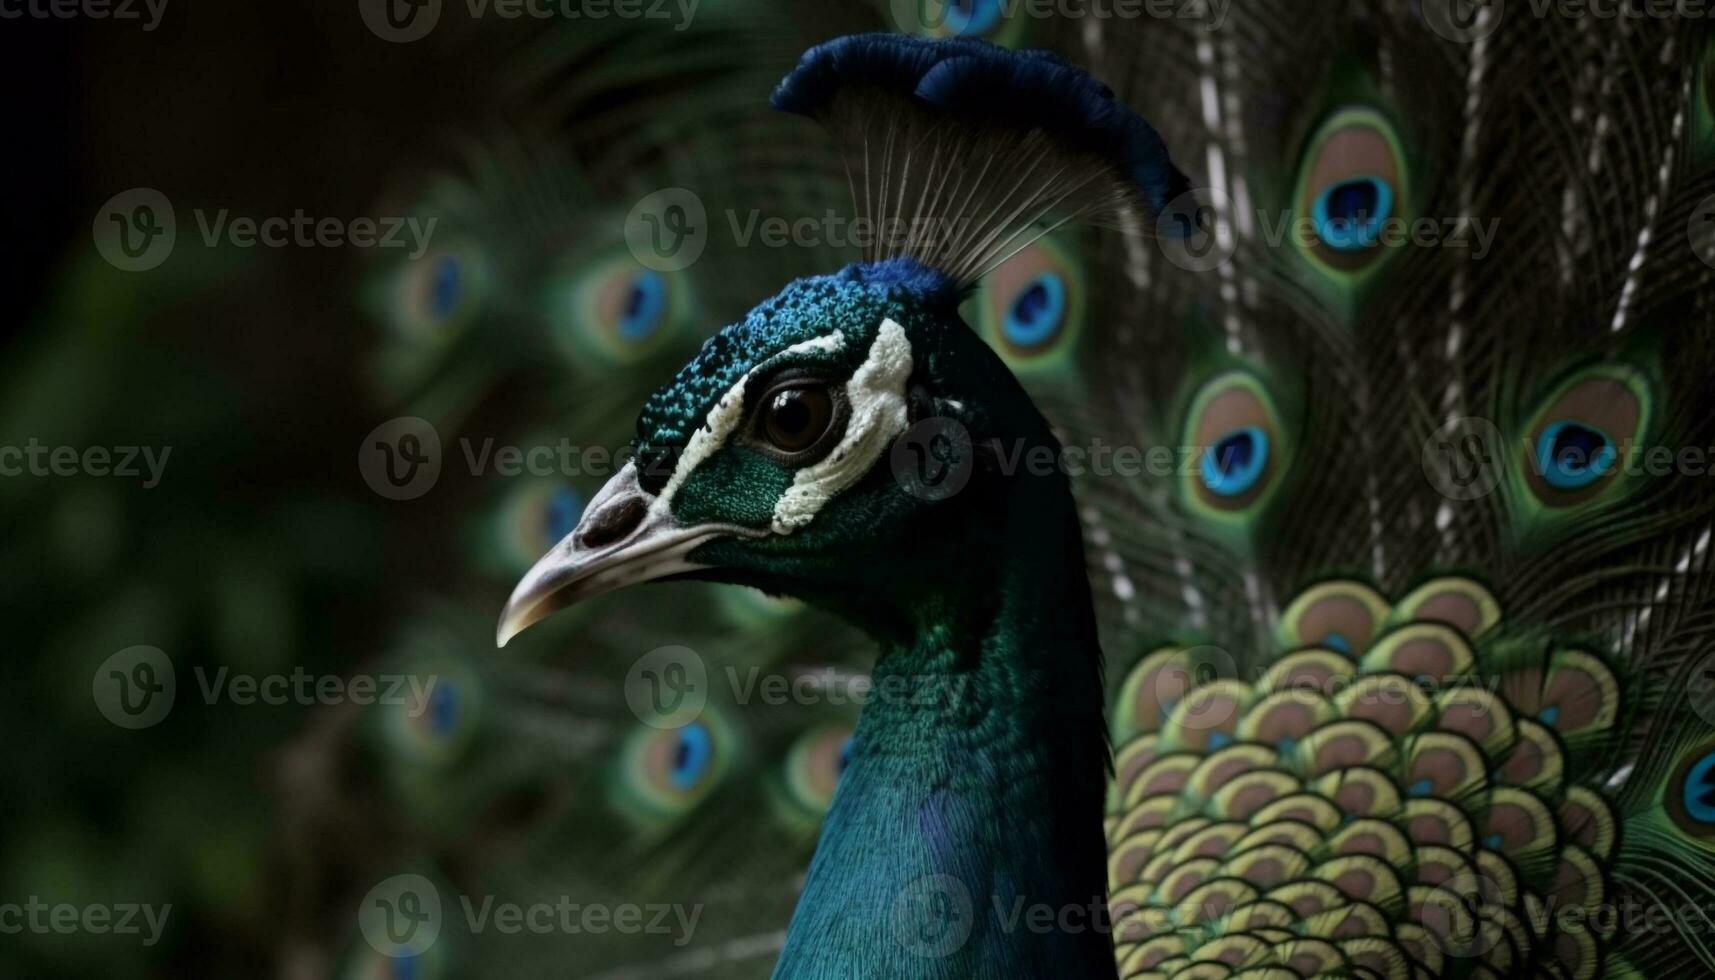 A vibrant peacock displays its majestic beauty in nature elegance generated by AI photo